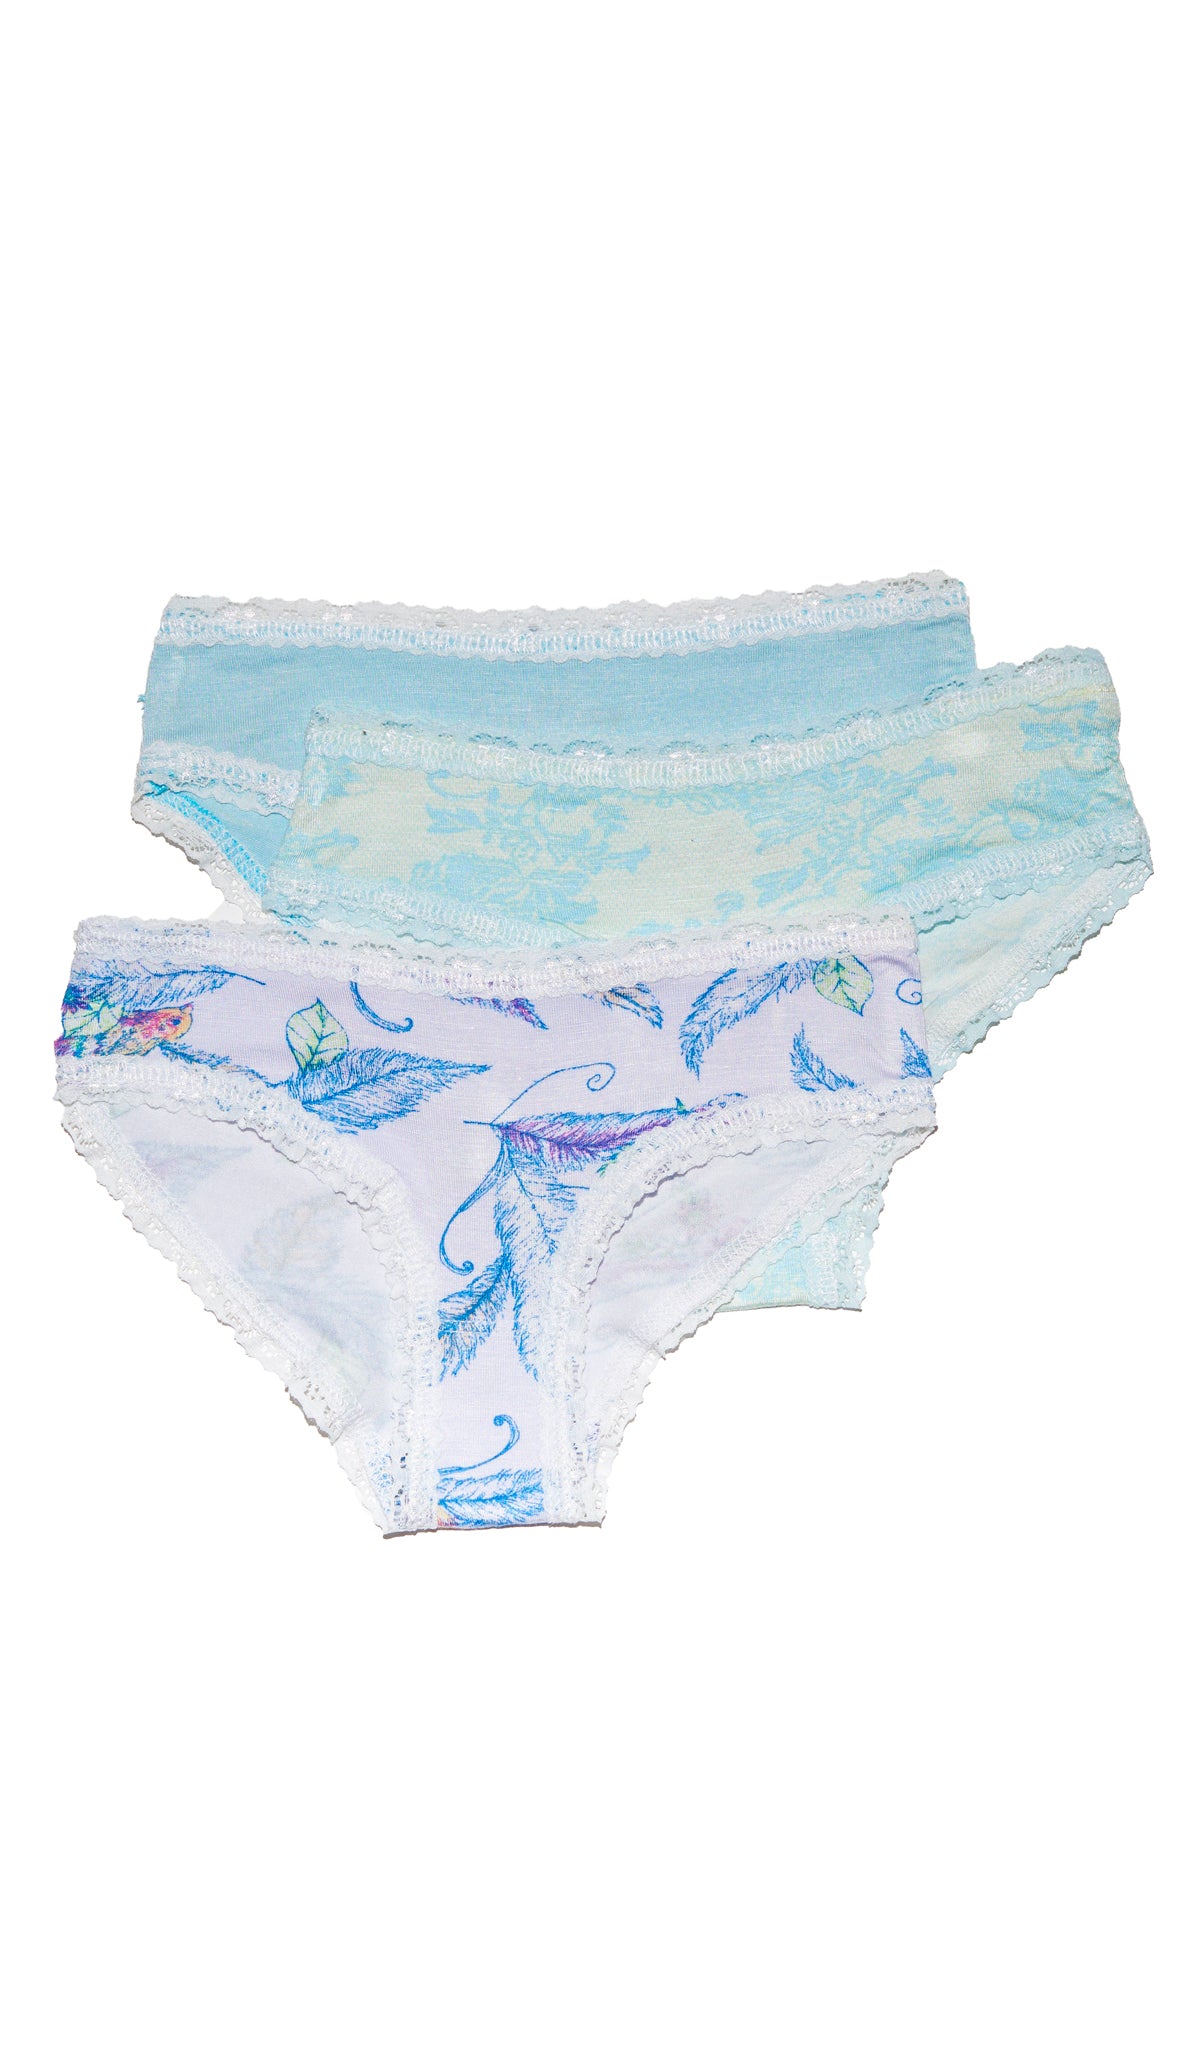 Sparrow Kayla Kids 3-Pack Underwear flat shot showing Sparrow print, blue chantilly print, and solid light blue underwear.